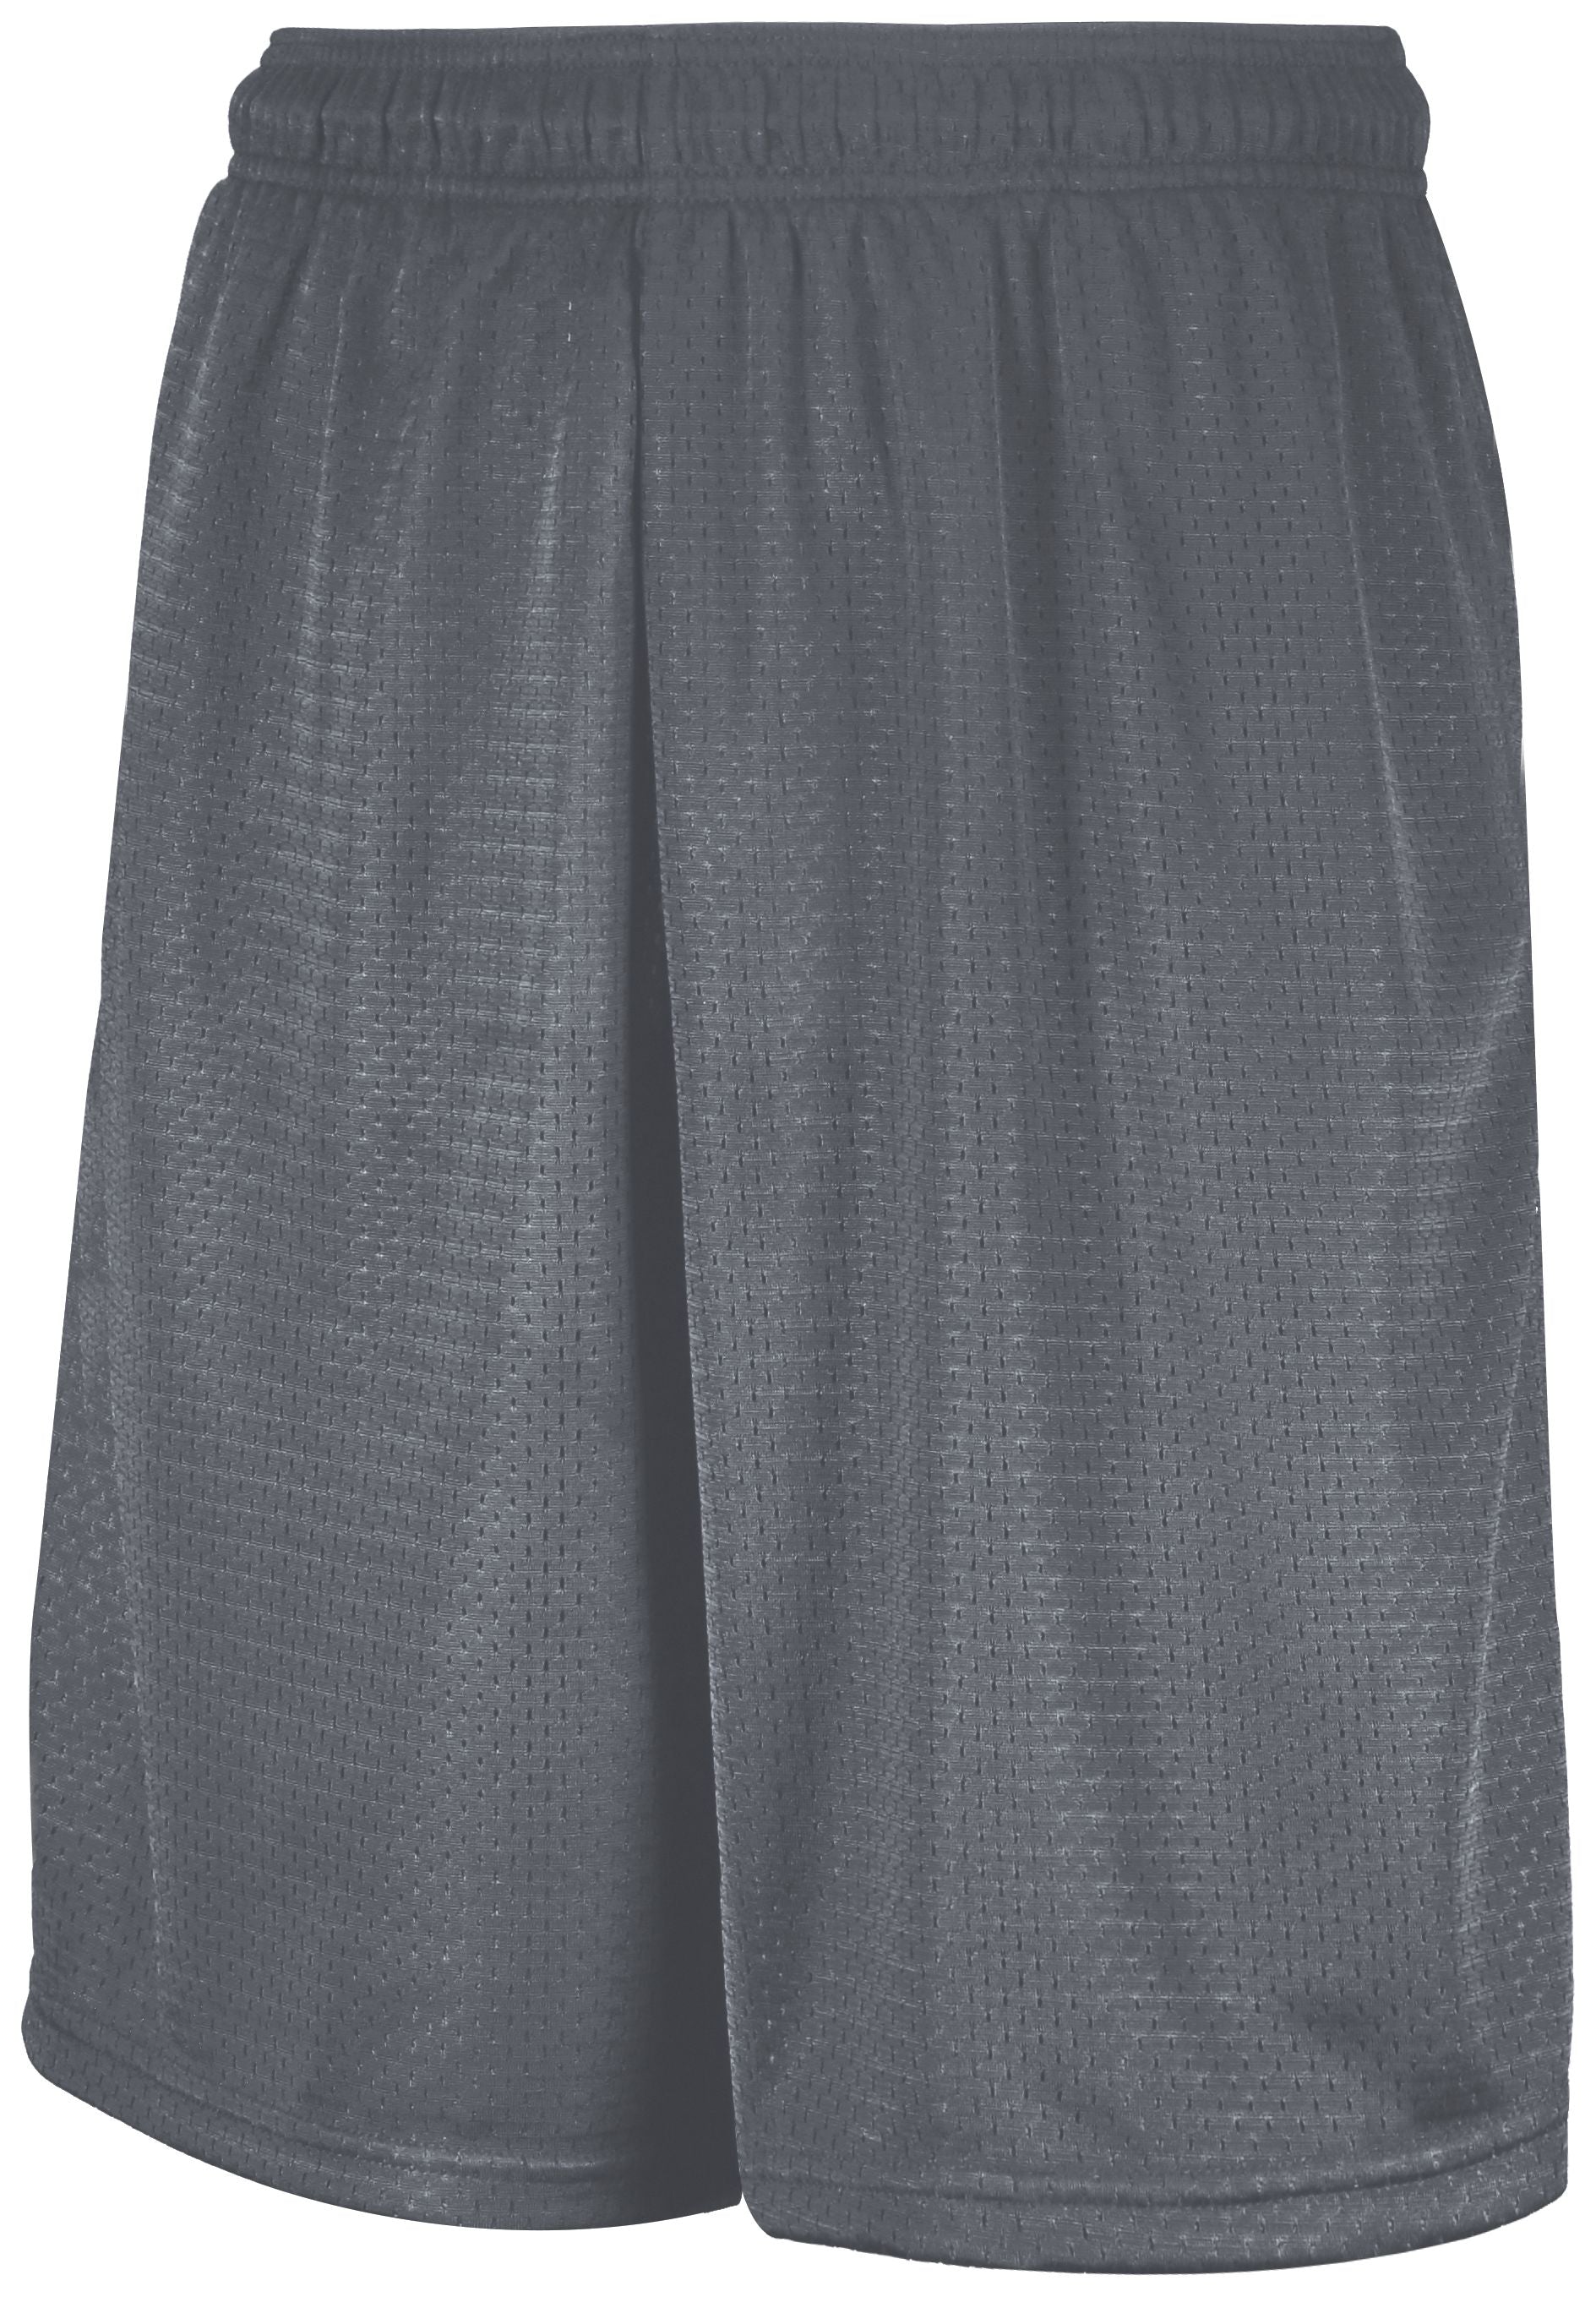 Russell Athletic Mesh Shorts With Pockets in Steel  -Part of the Adult, Adult-Shorts, Russell-Athletic-Products product lines at KanaleyCreations.com